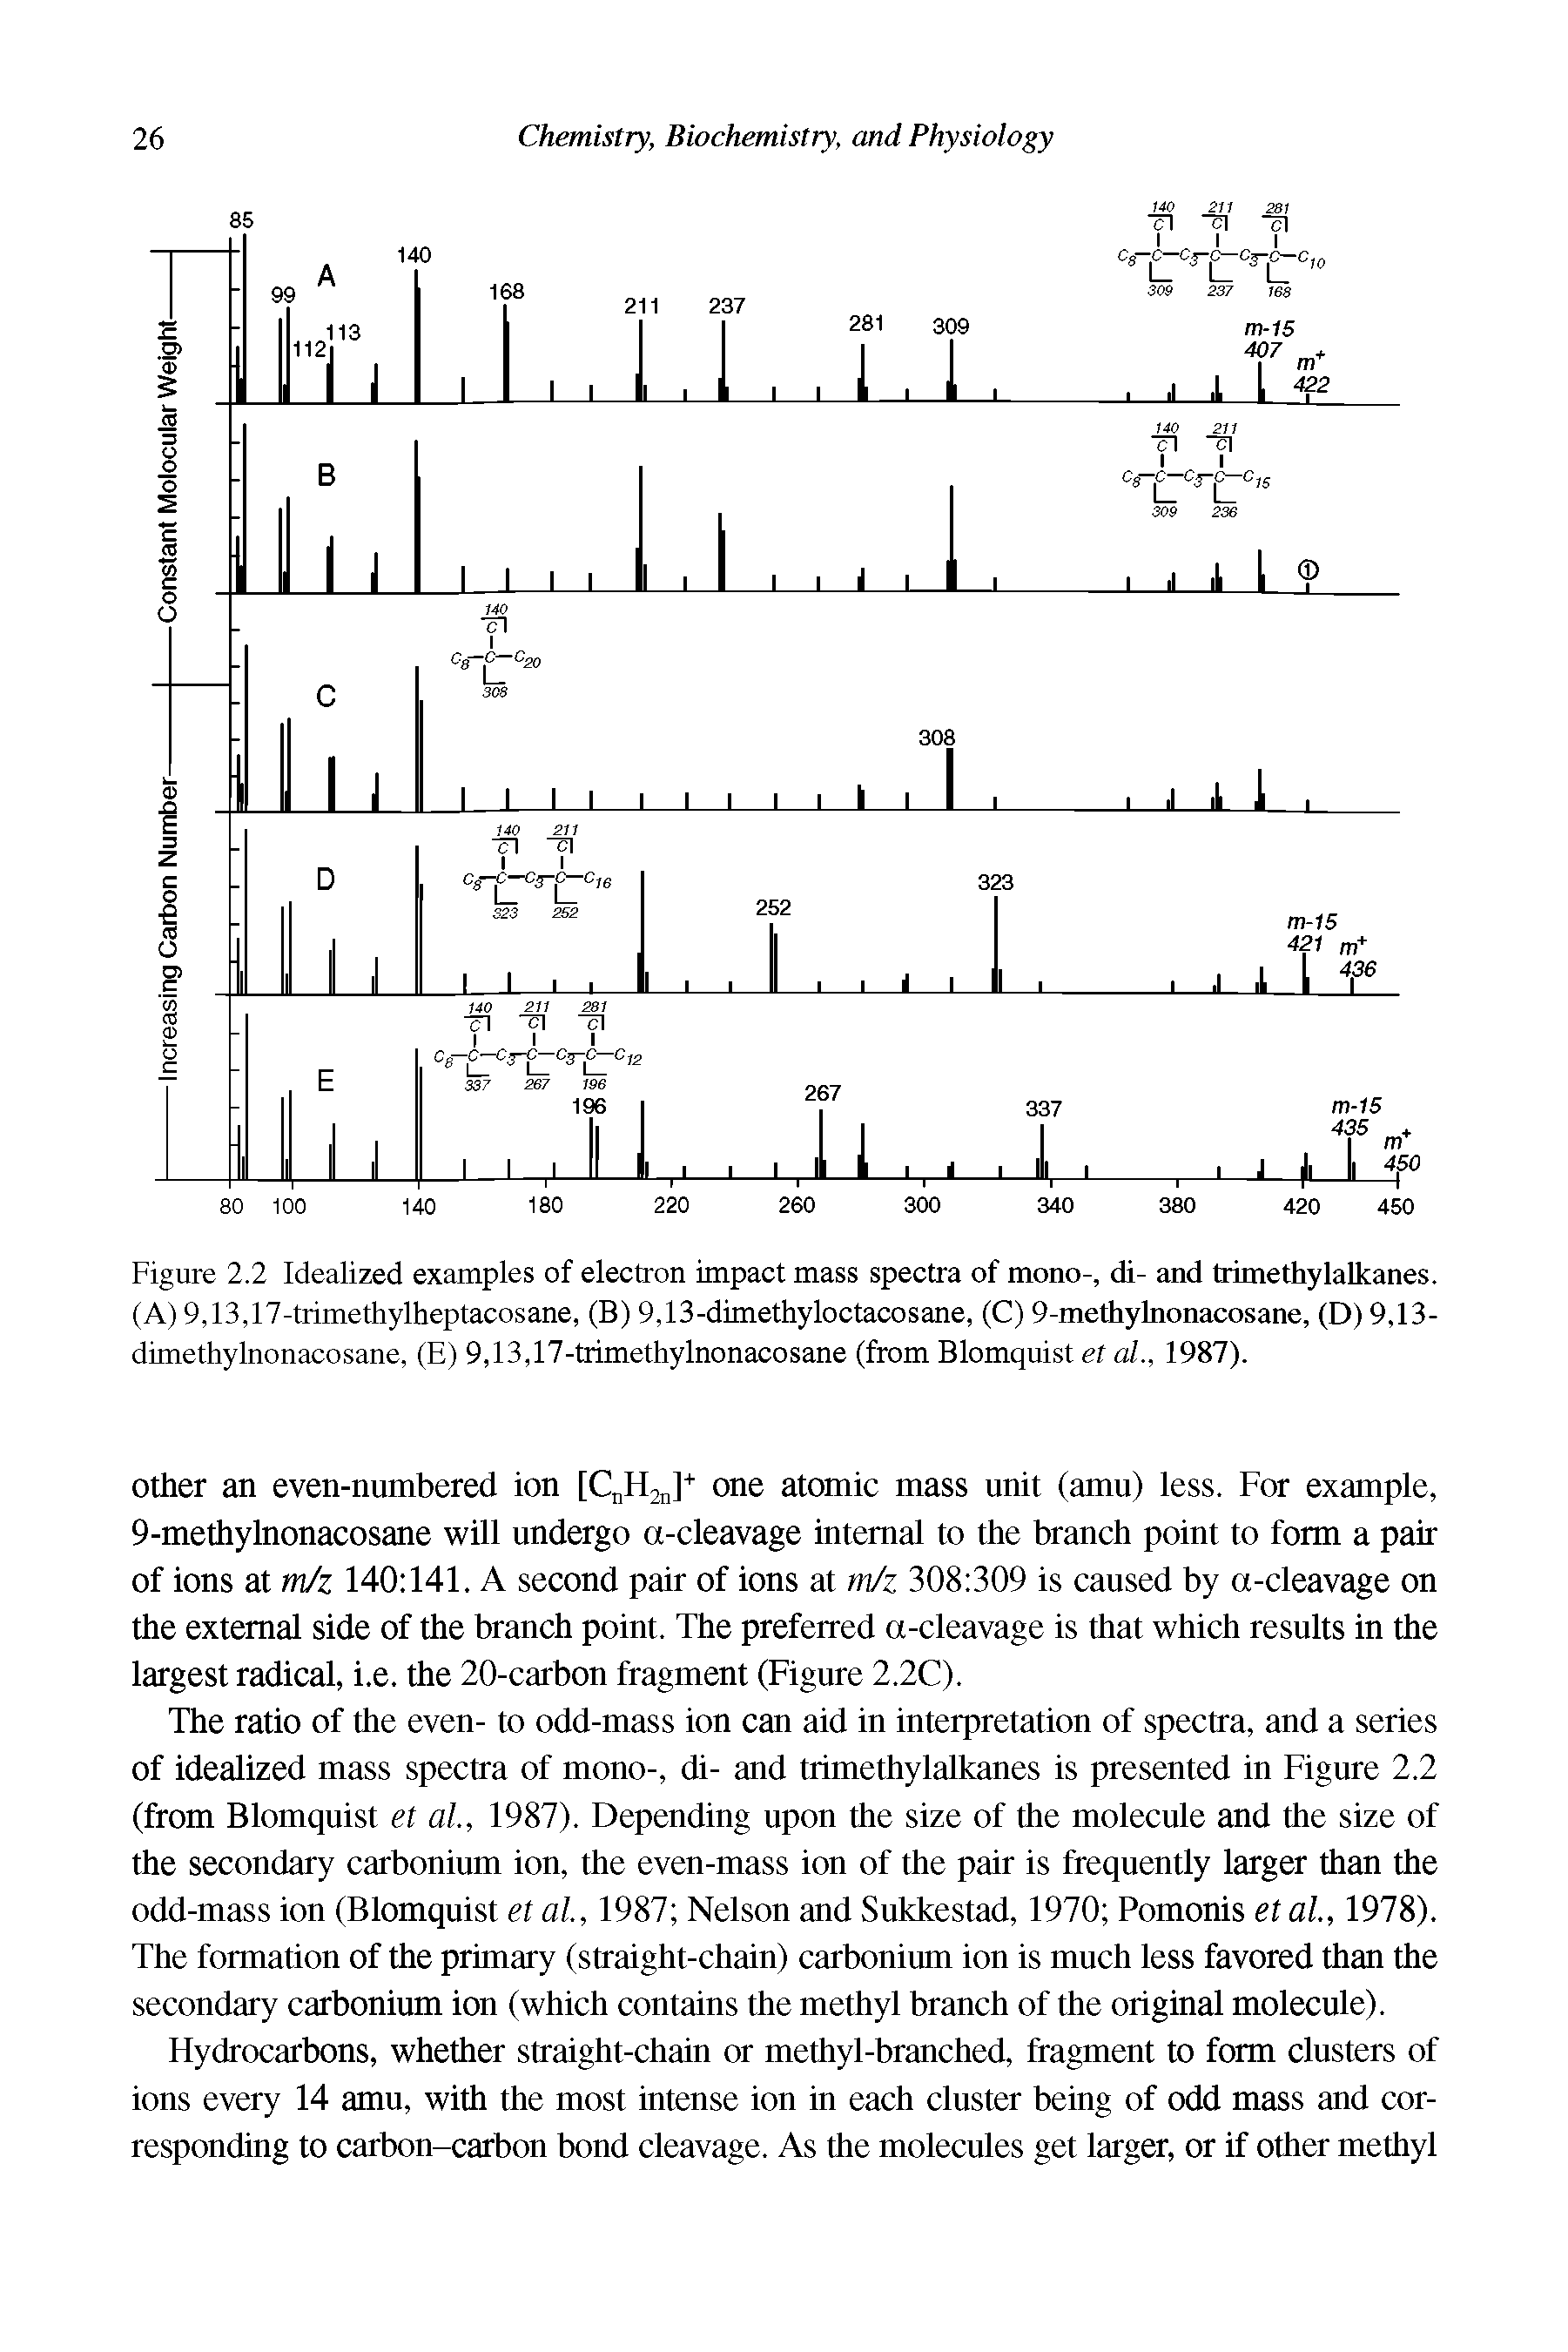 Figure 2.2 Idealized examples of electron impact mass spectra of mono-, di- and trimethylalkanes. (A) 9,13,17-trimethylheptacosane, (B) 9,13-dimethyloctacosane, (C) 9-methylnonacosane, (D) 9,13-dimethylnonacosane, (E) 9,13,17-trimethylnonacosane (from Blomquist et al., 1987).